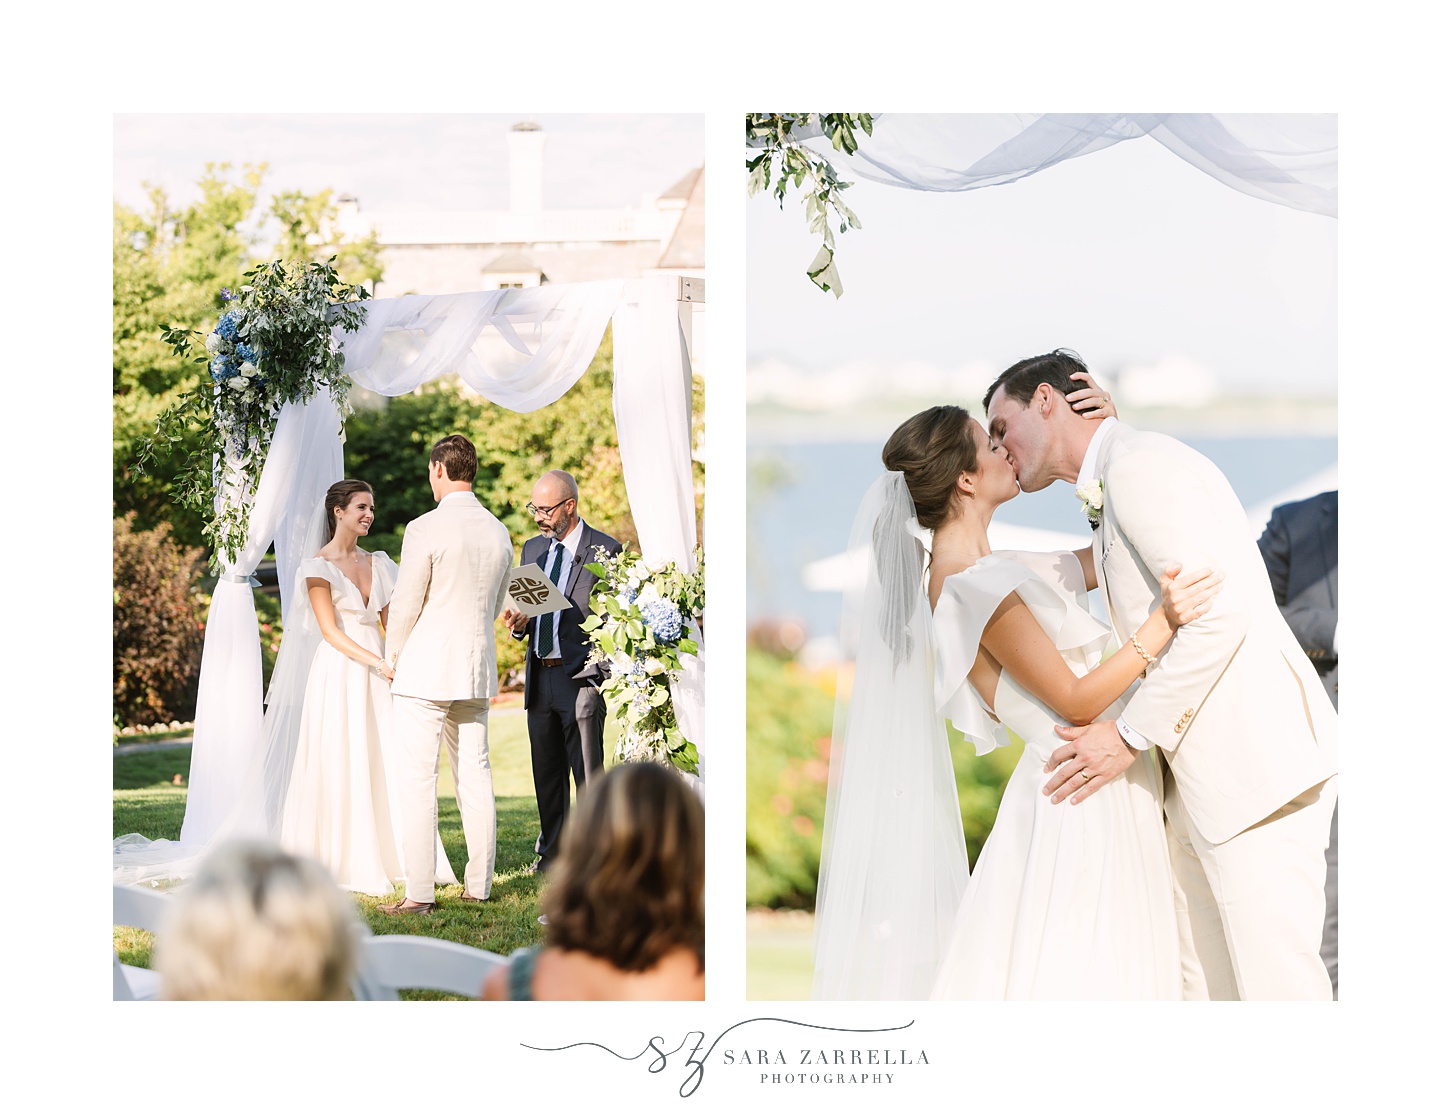 newlyweds kiss during outdoor wedding ceremony overlooking the water 